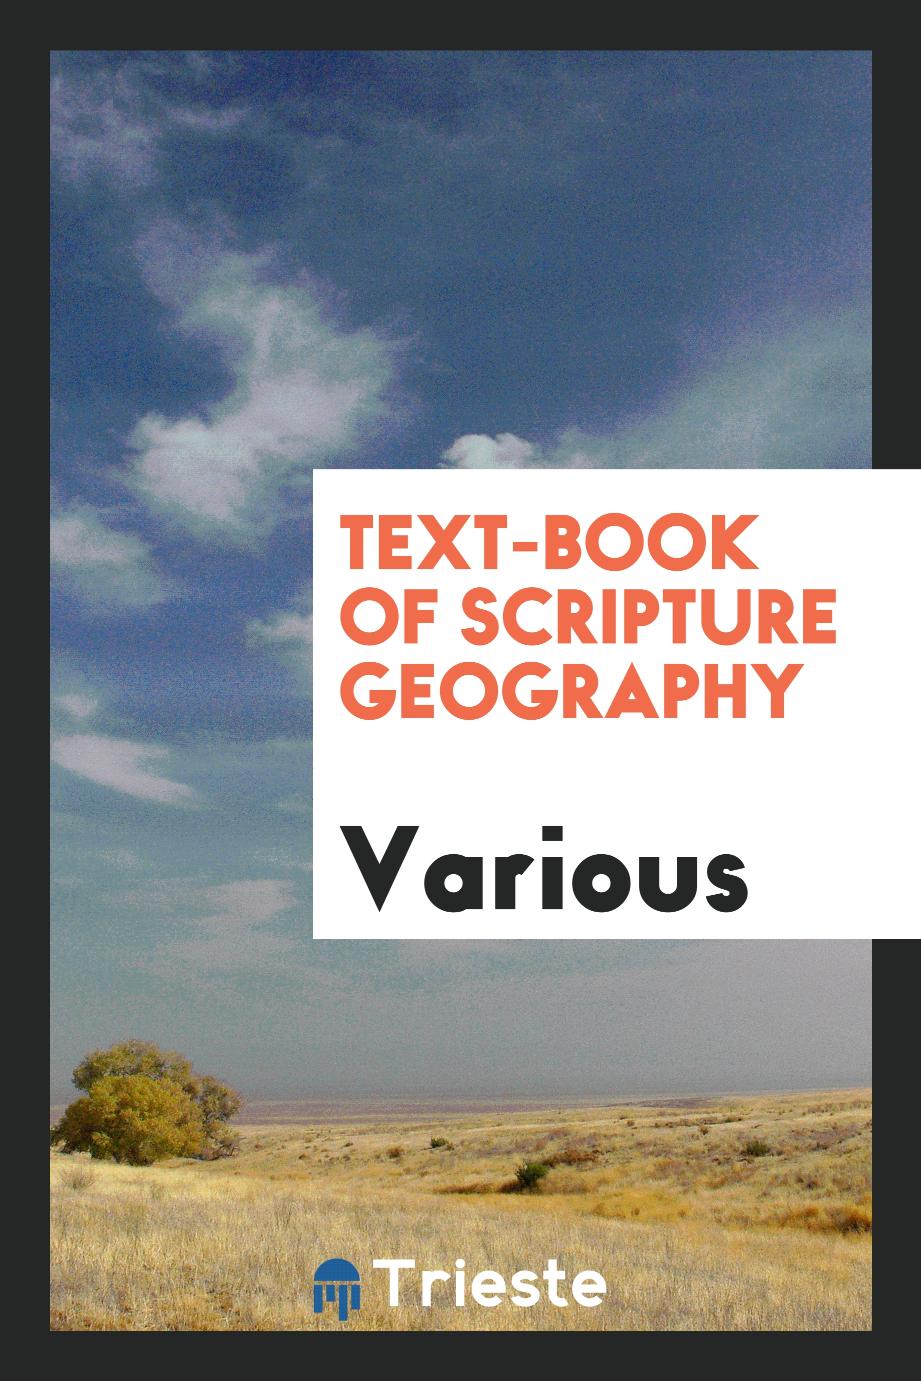 Text-book of Scripture geography